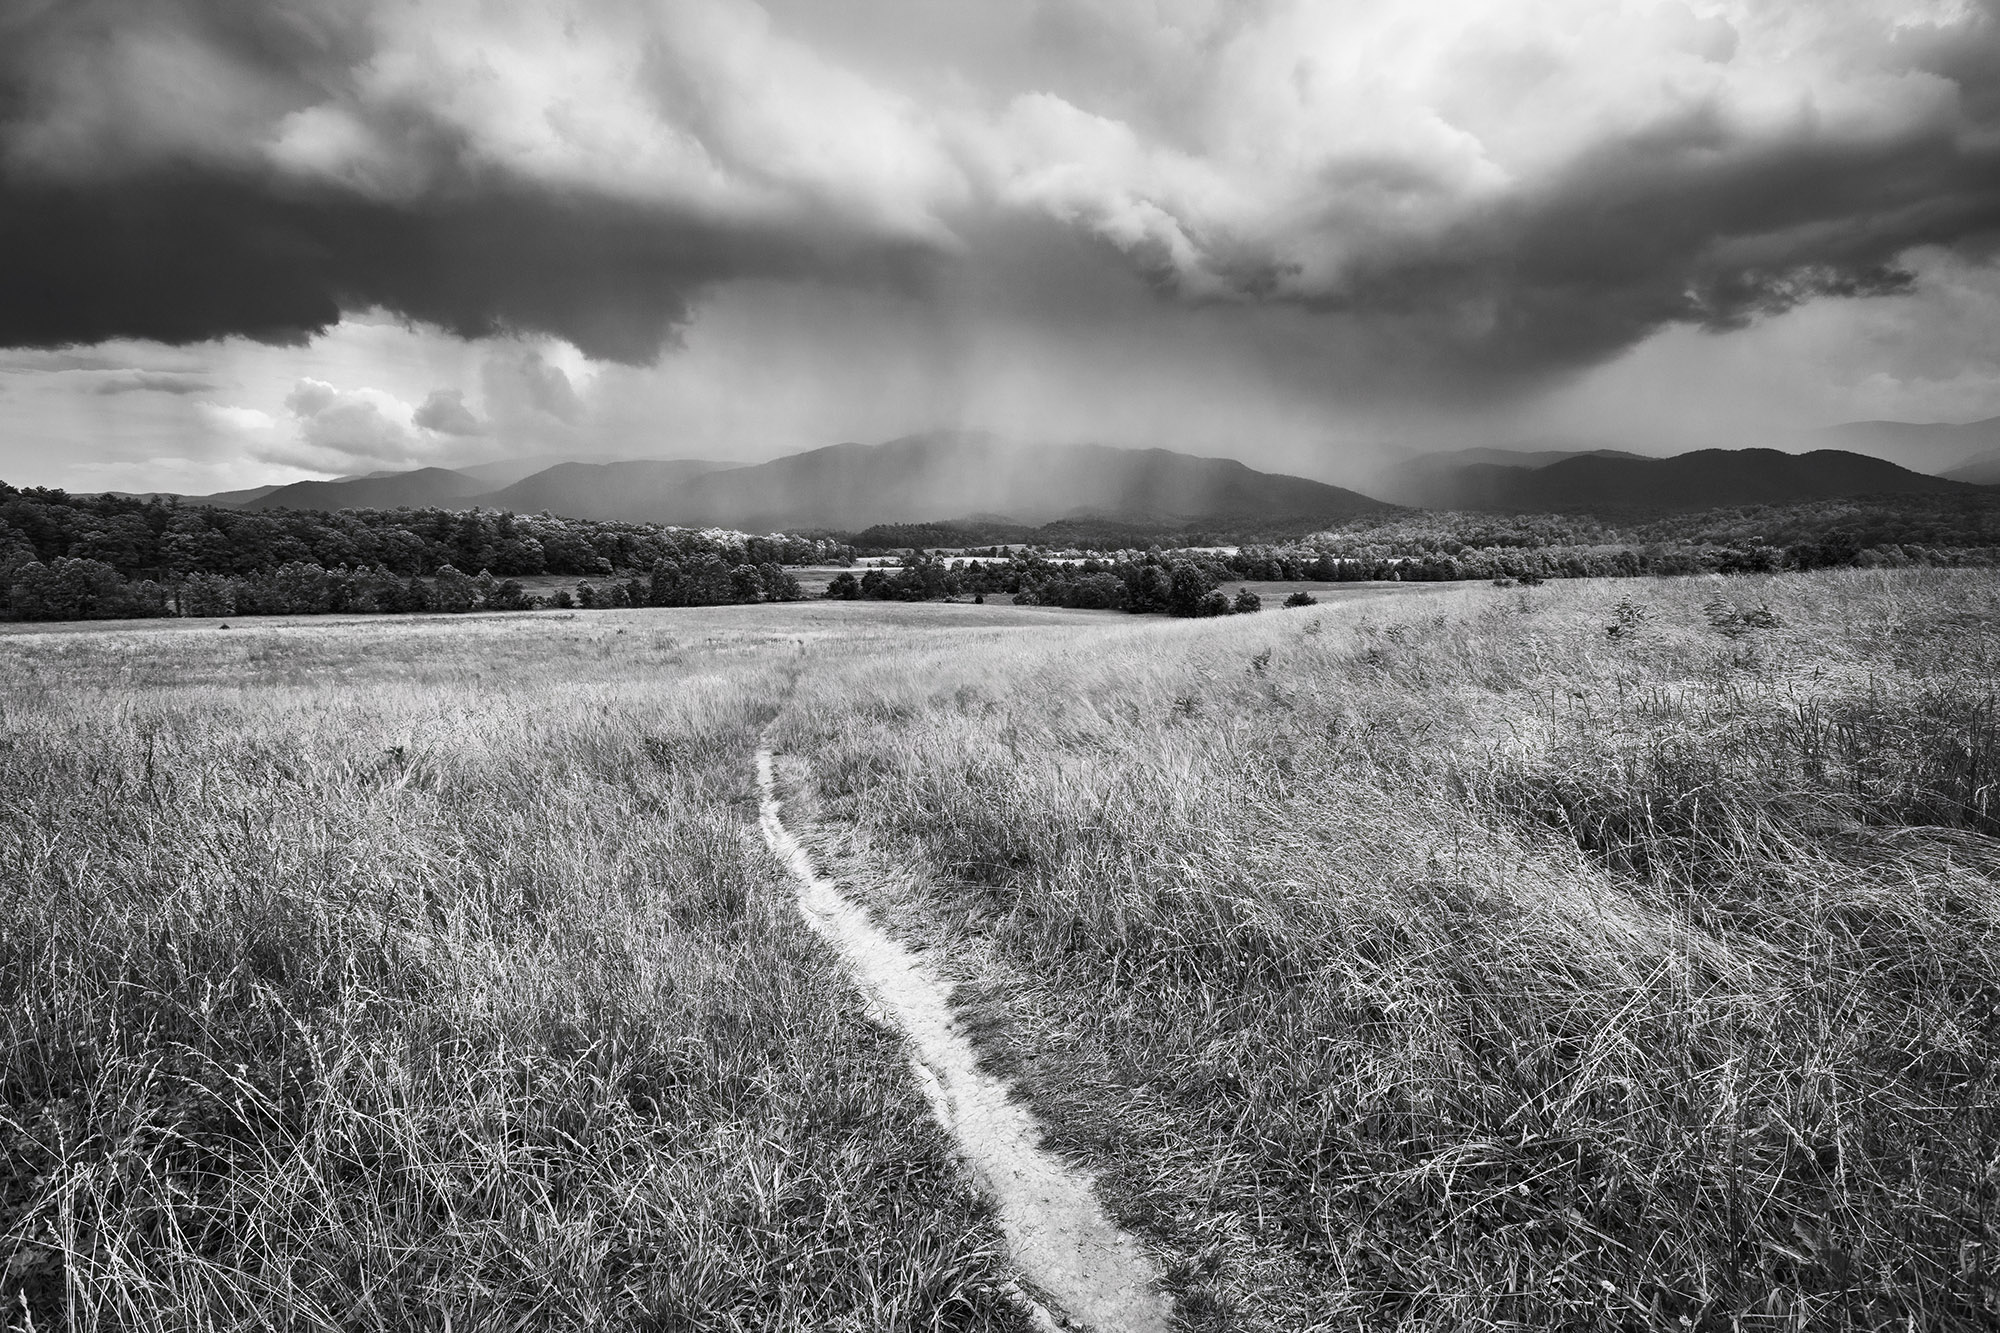 Storm passing in Cades Cove in the Great Smoky Mountains